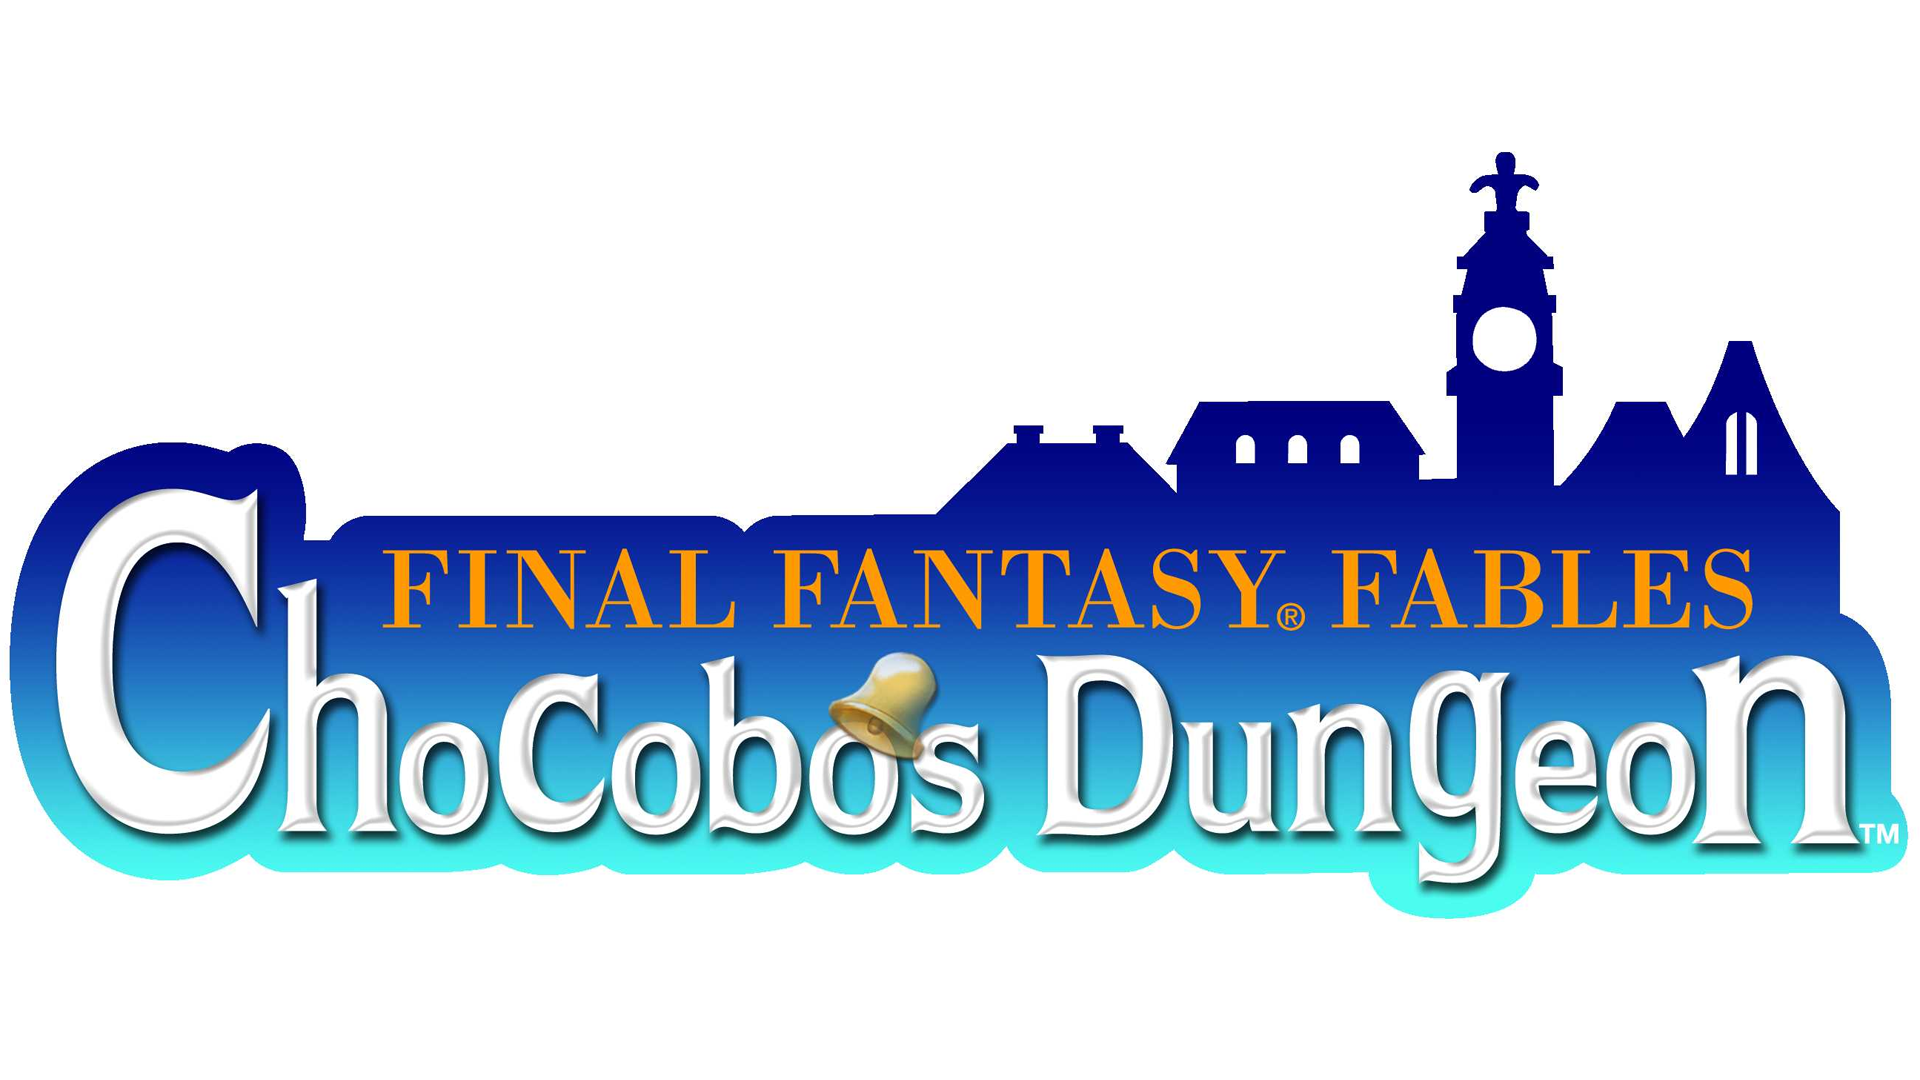 Final Fantasy Fables: Chocobo's Dungeon Logo